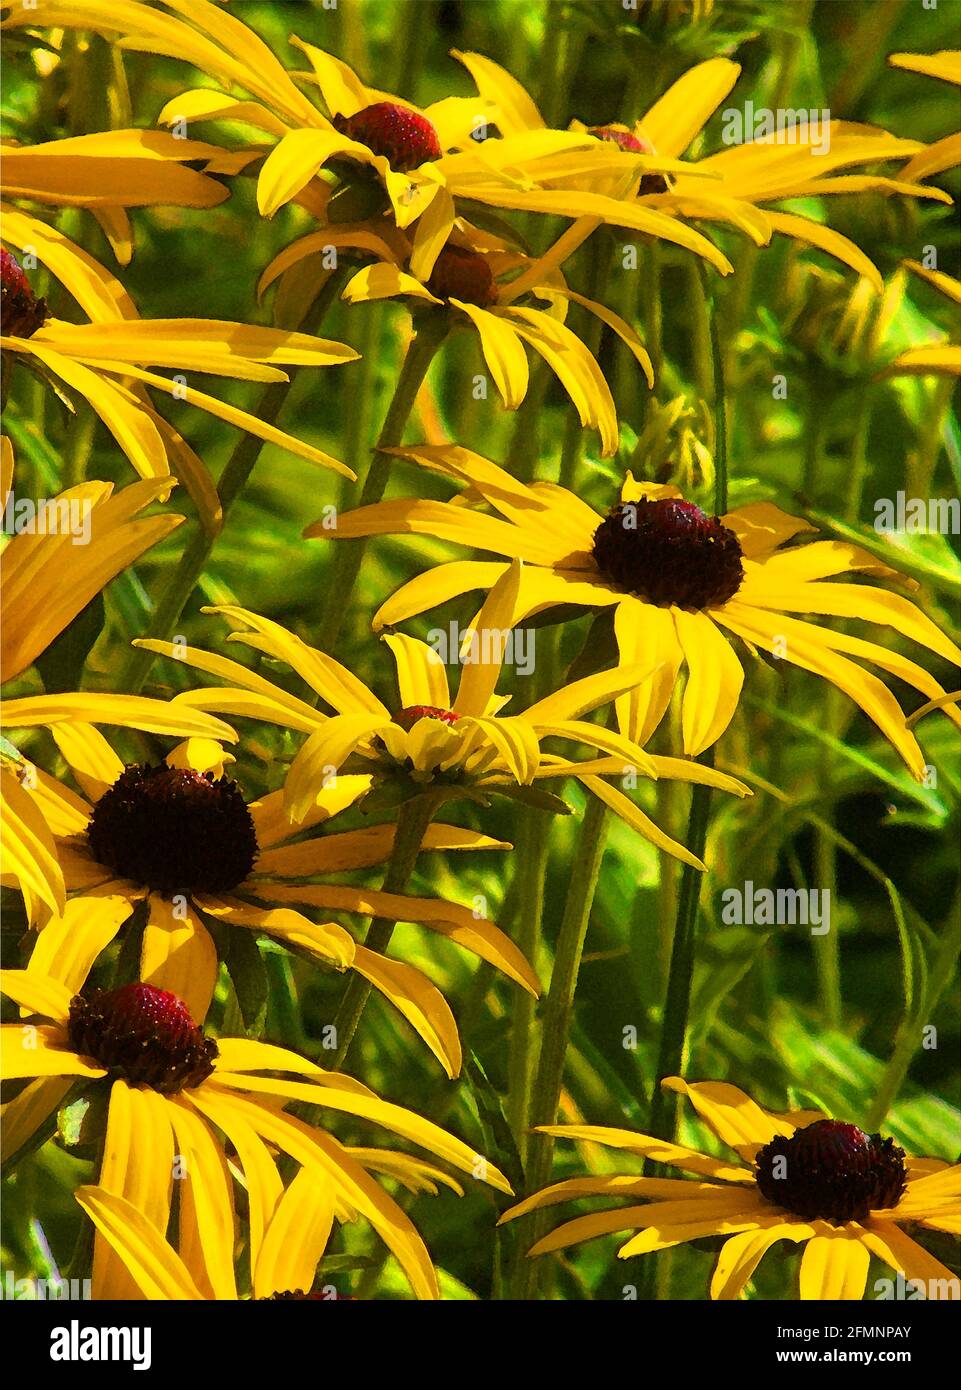 Black-Eyed Susan (Rudebeckia fulgida var. deamii) One of Forty-two Iconic Images of English Garden Flowers, Wildflowers and Rural Landscapes. Stock Photo